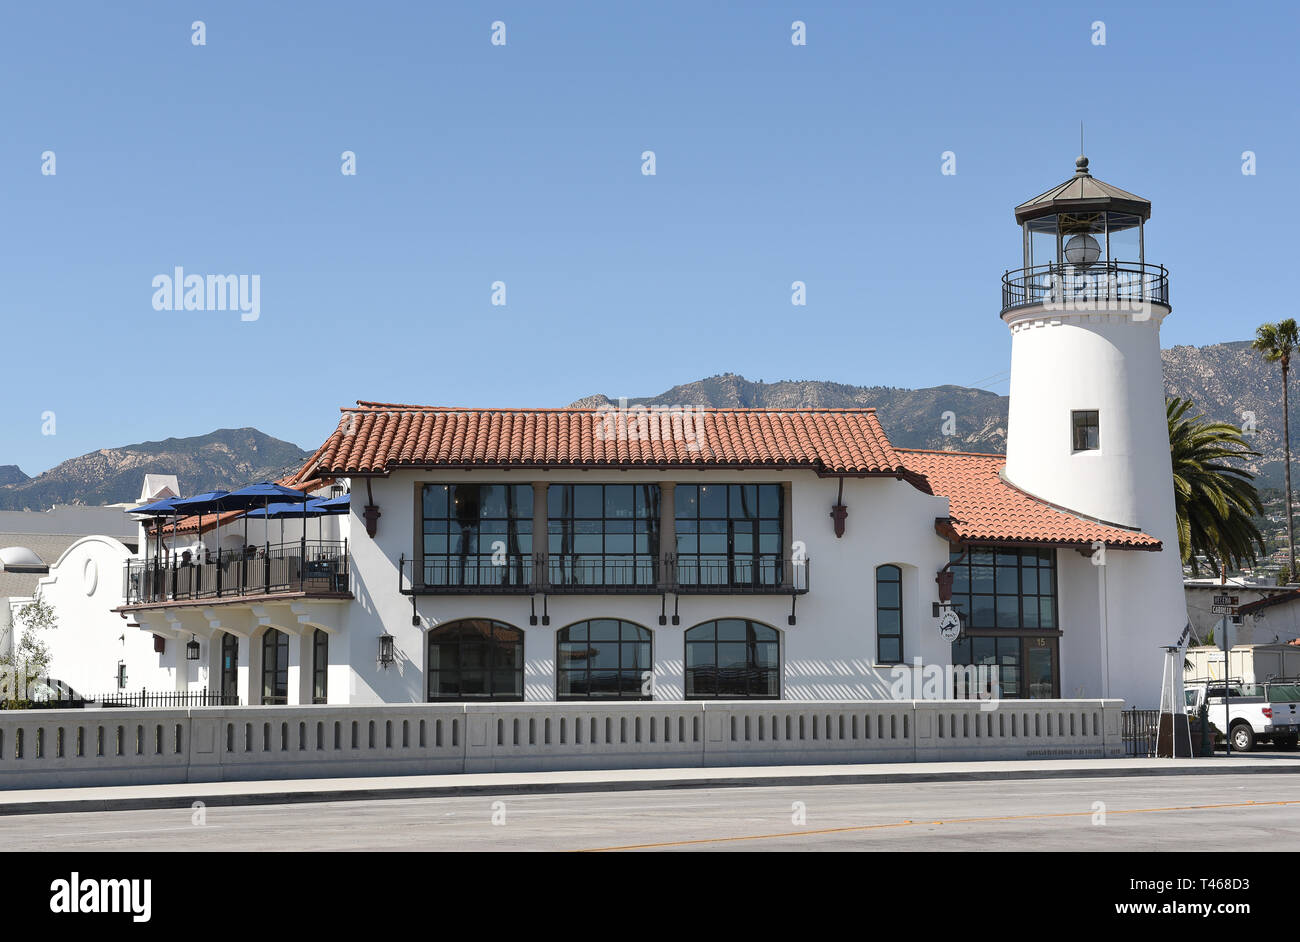 SANTA BARBARA, CALIFORNIA - APRIL 11, 2019: The Blue Water Grill restaurant at State Street and Cabrillo Boulevard offers seafood with harbor views. Stock Photo